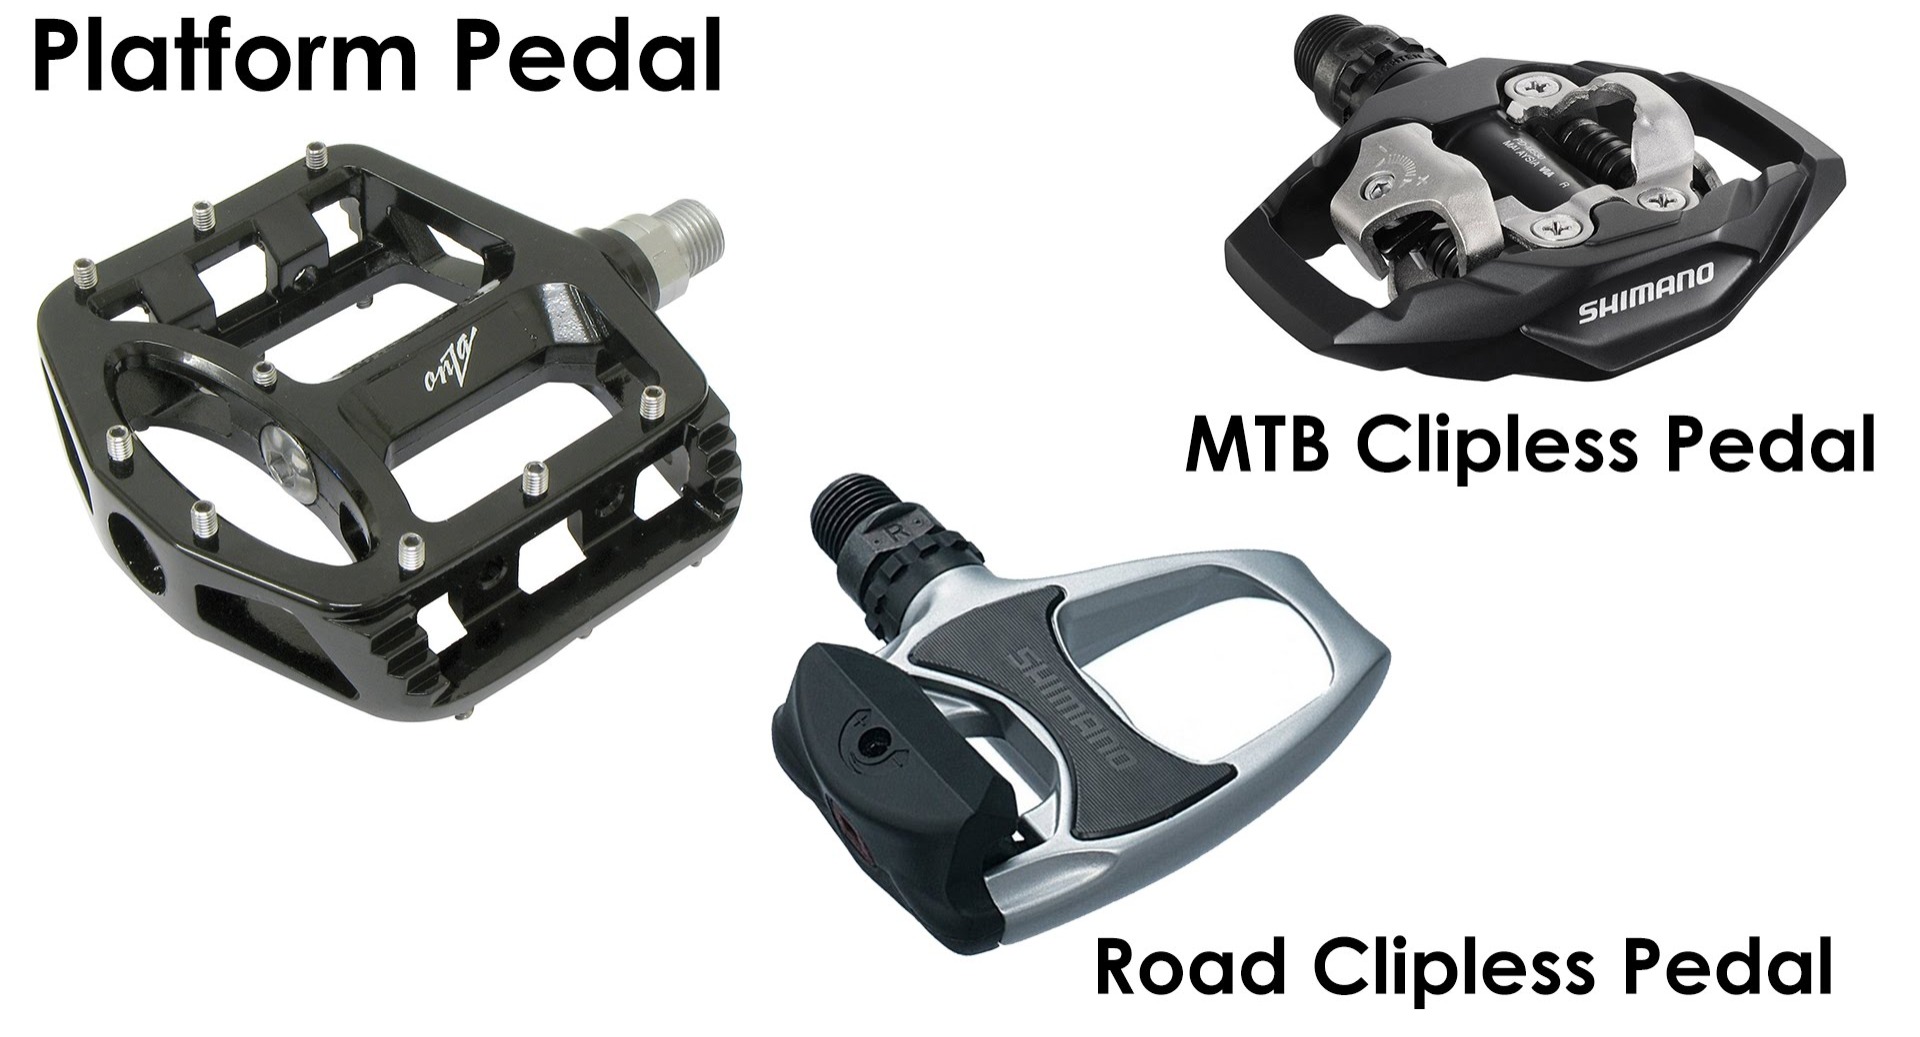 wenselijk Binnenshuis Anesthesie Clipless Pedals Guide | Everything You Need To Know - Dedham Bike